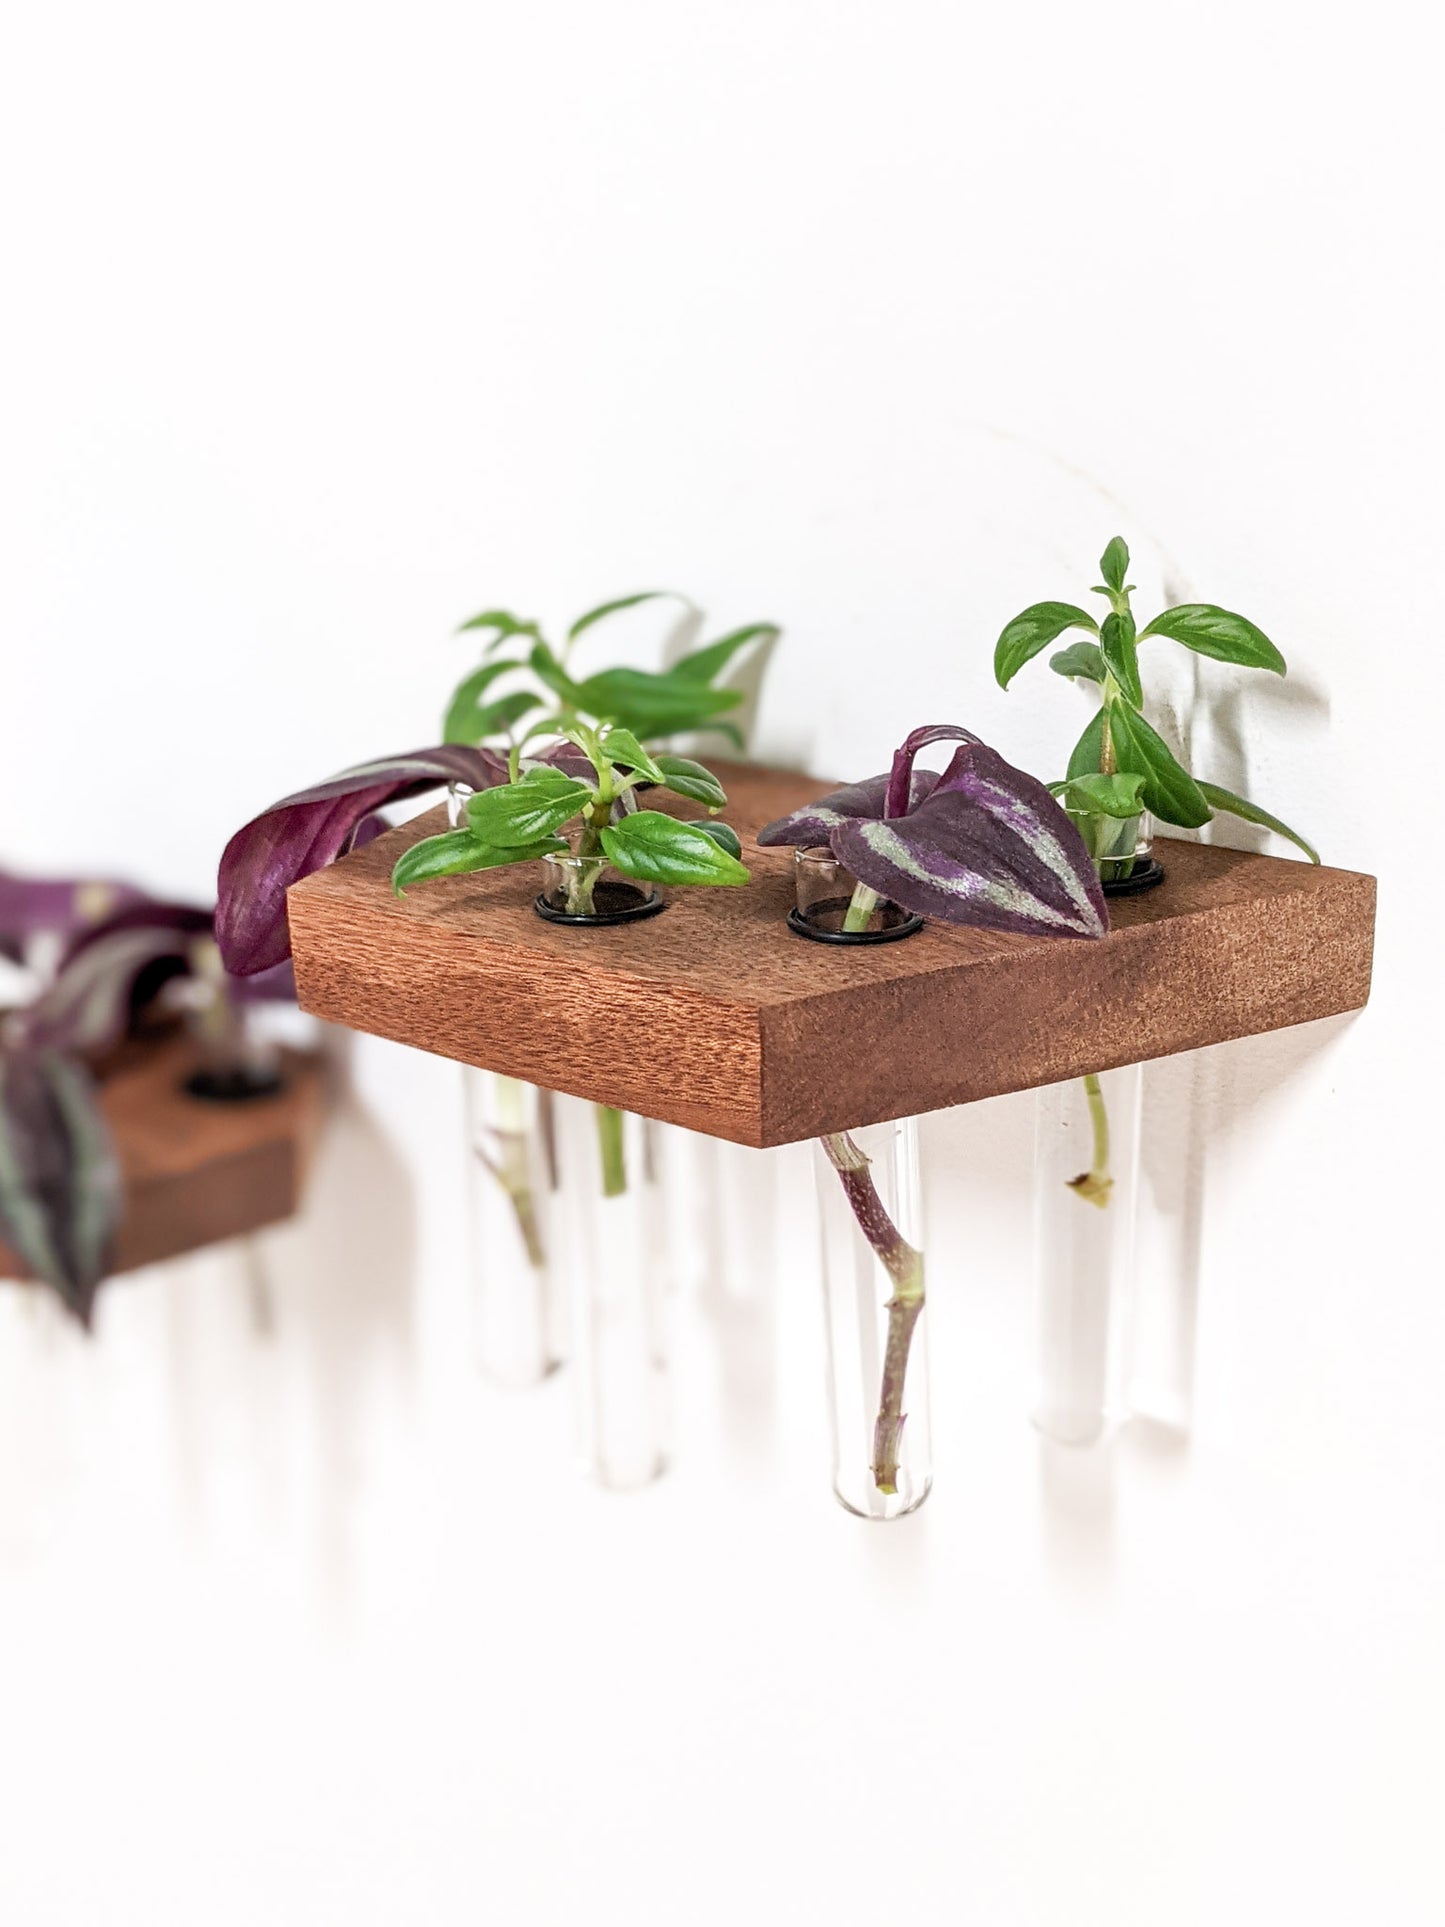 A rhombus mahogany propagation shelf is wall mounted. Four test tubes dangle beneath the shelf and contain cutting of a wandering jew plant. To the left, the side of a mahogany octagon propagation shelf can be seen